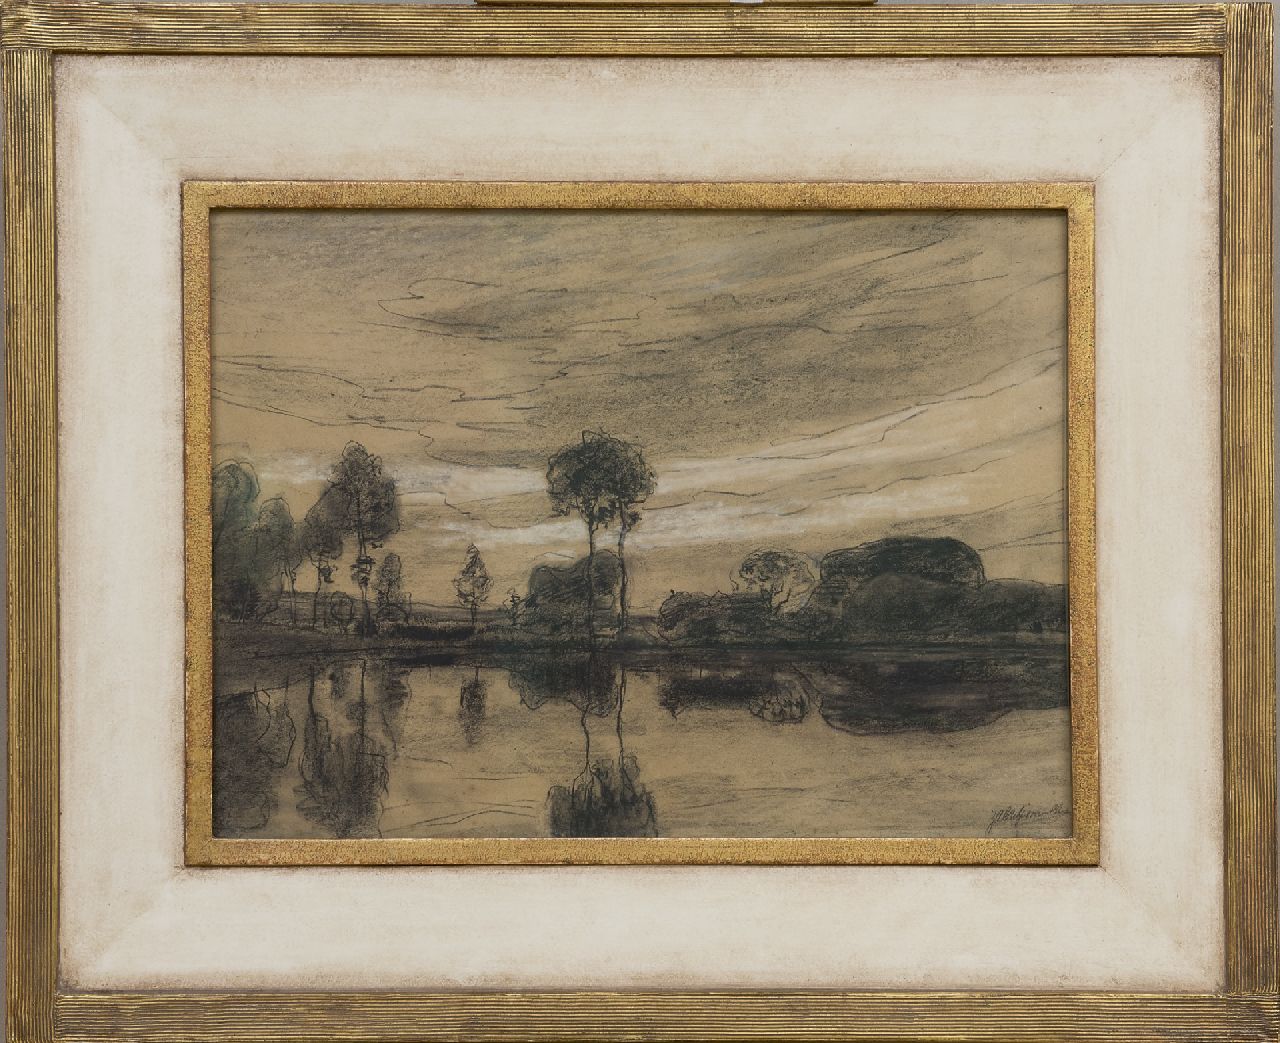 Wijsmuller J.H.  | Jan Hillebrand Wijsmuller | Watercolours and drawings offered for sale | Trees along the water, black chalk on paper 42.0 x 57.0 cm, signed l.r.